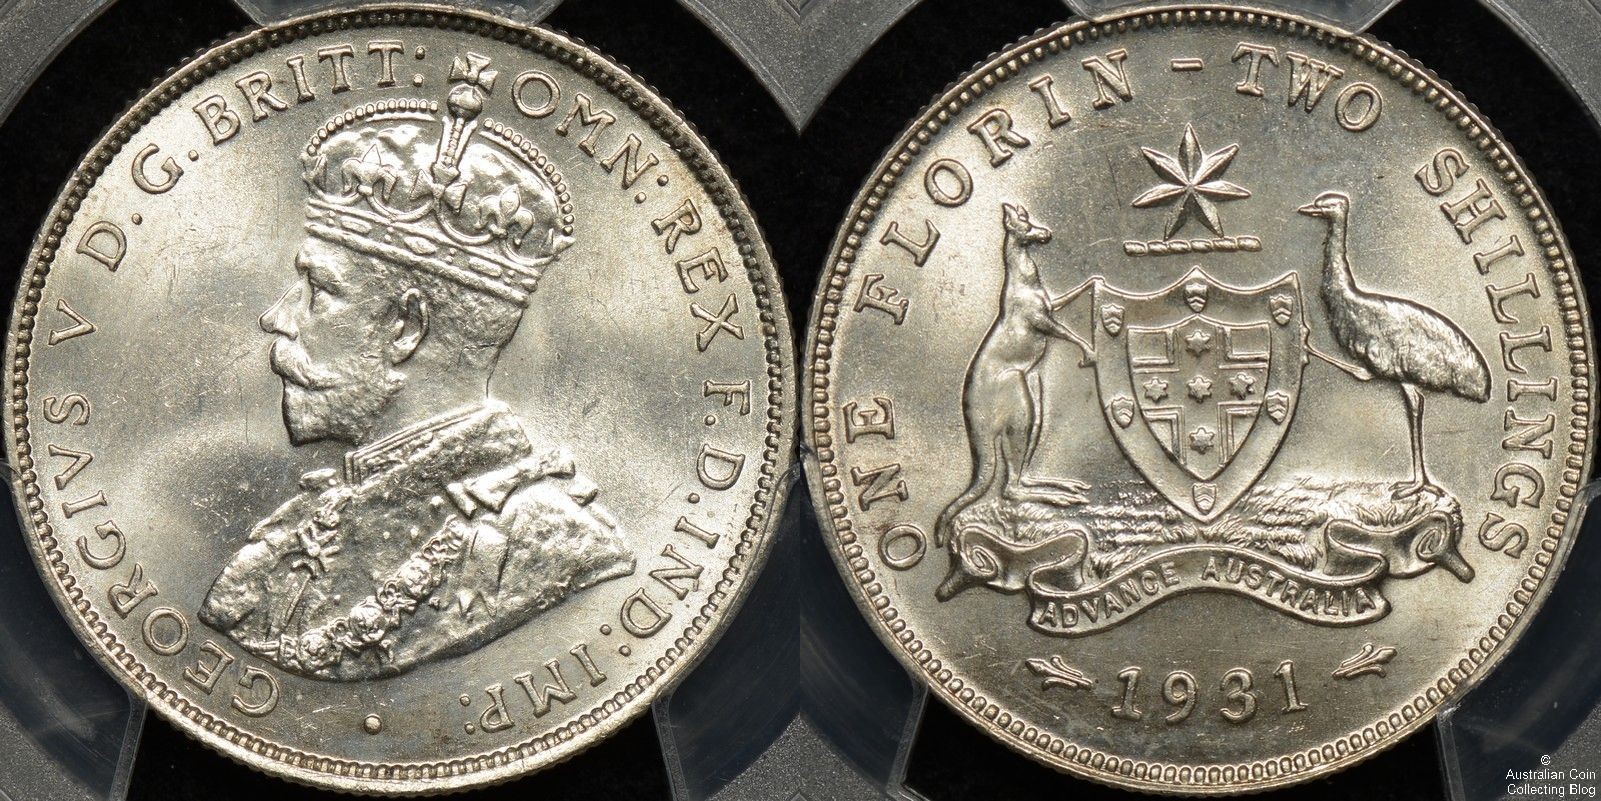 Australian 1931 Florin with portrait of King George V